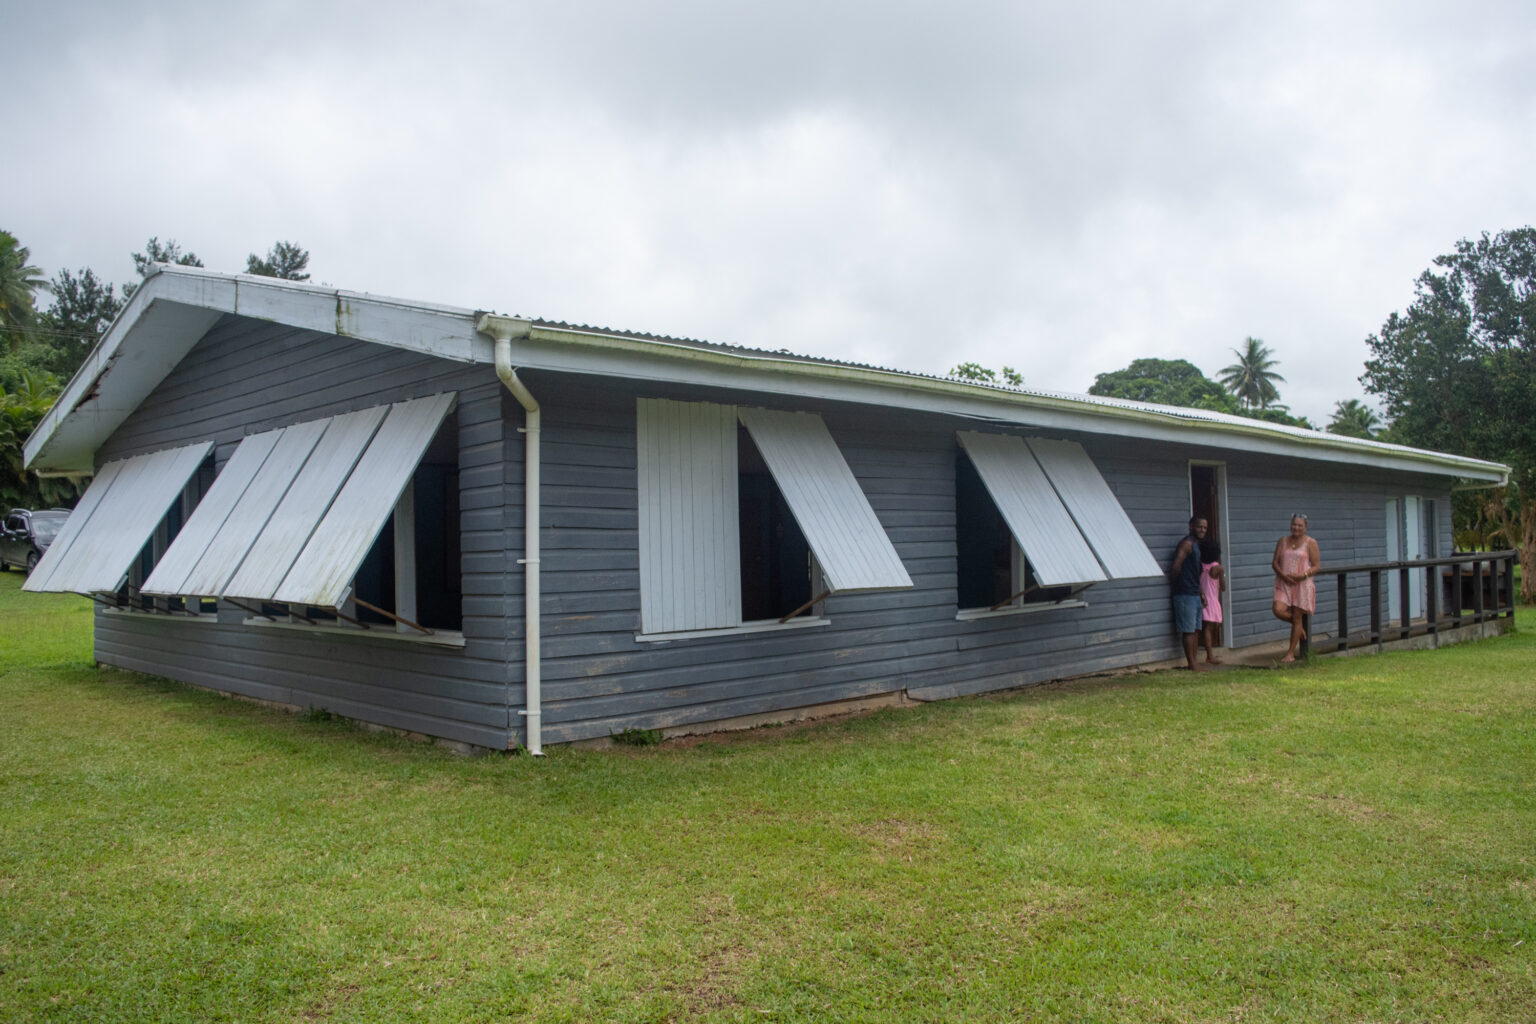 Seacology-funded community center